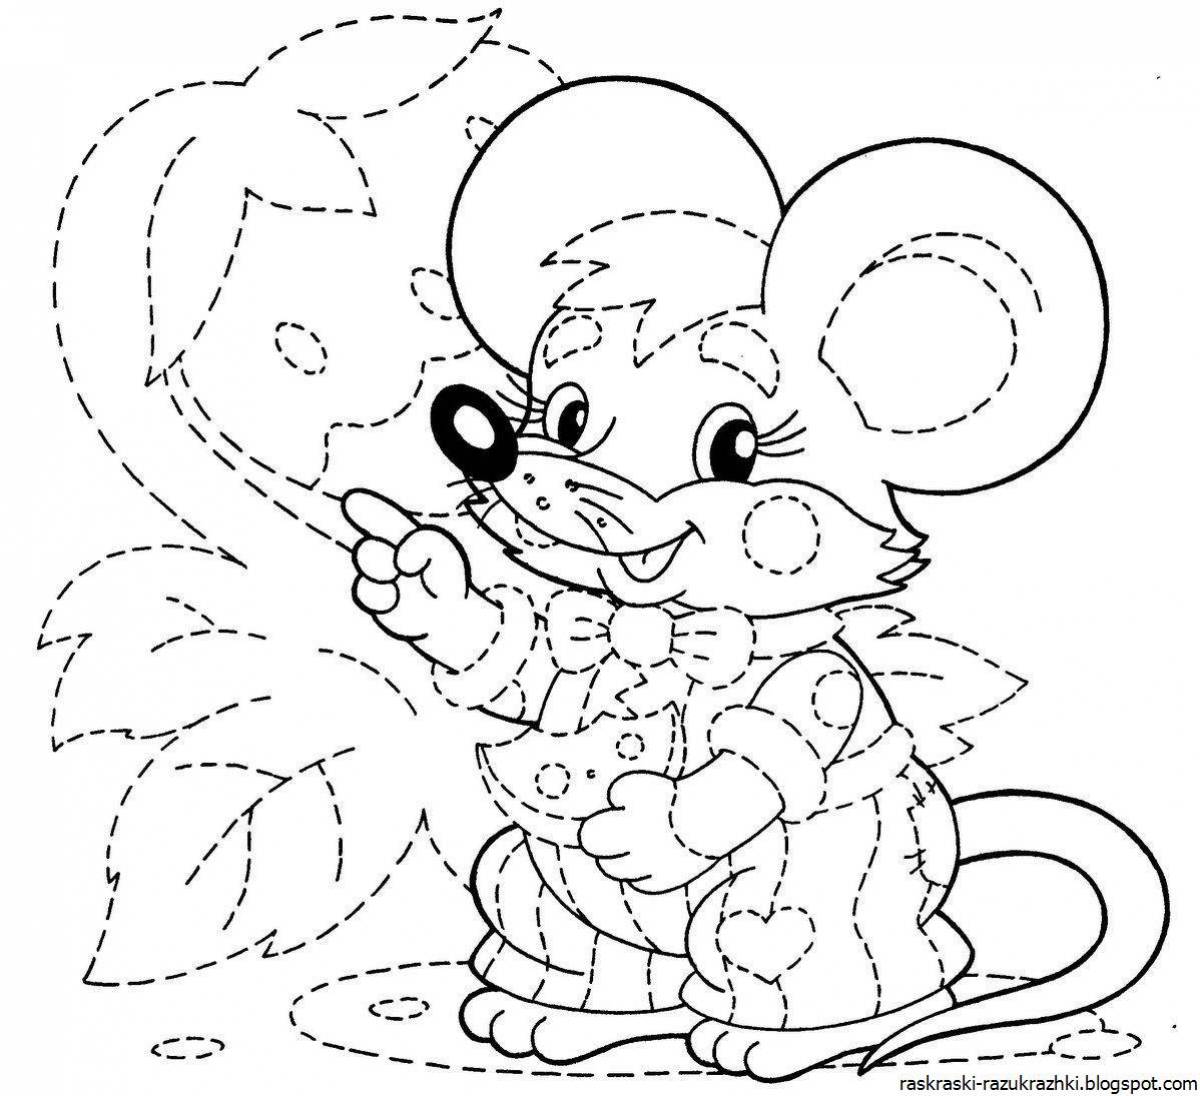 Outstanding mouse coloring page for kids